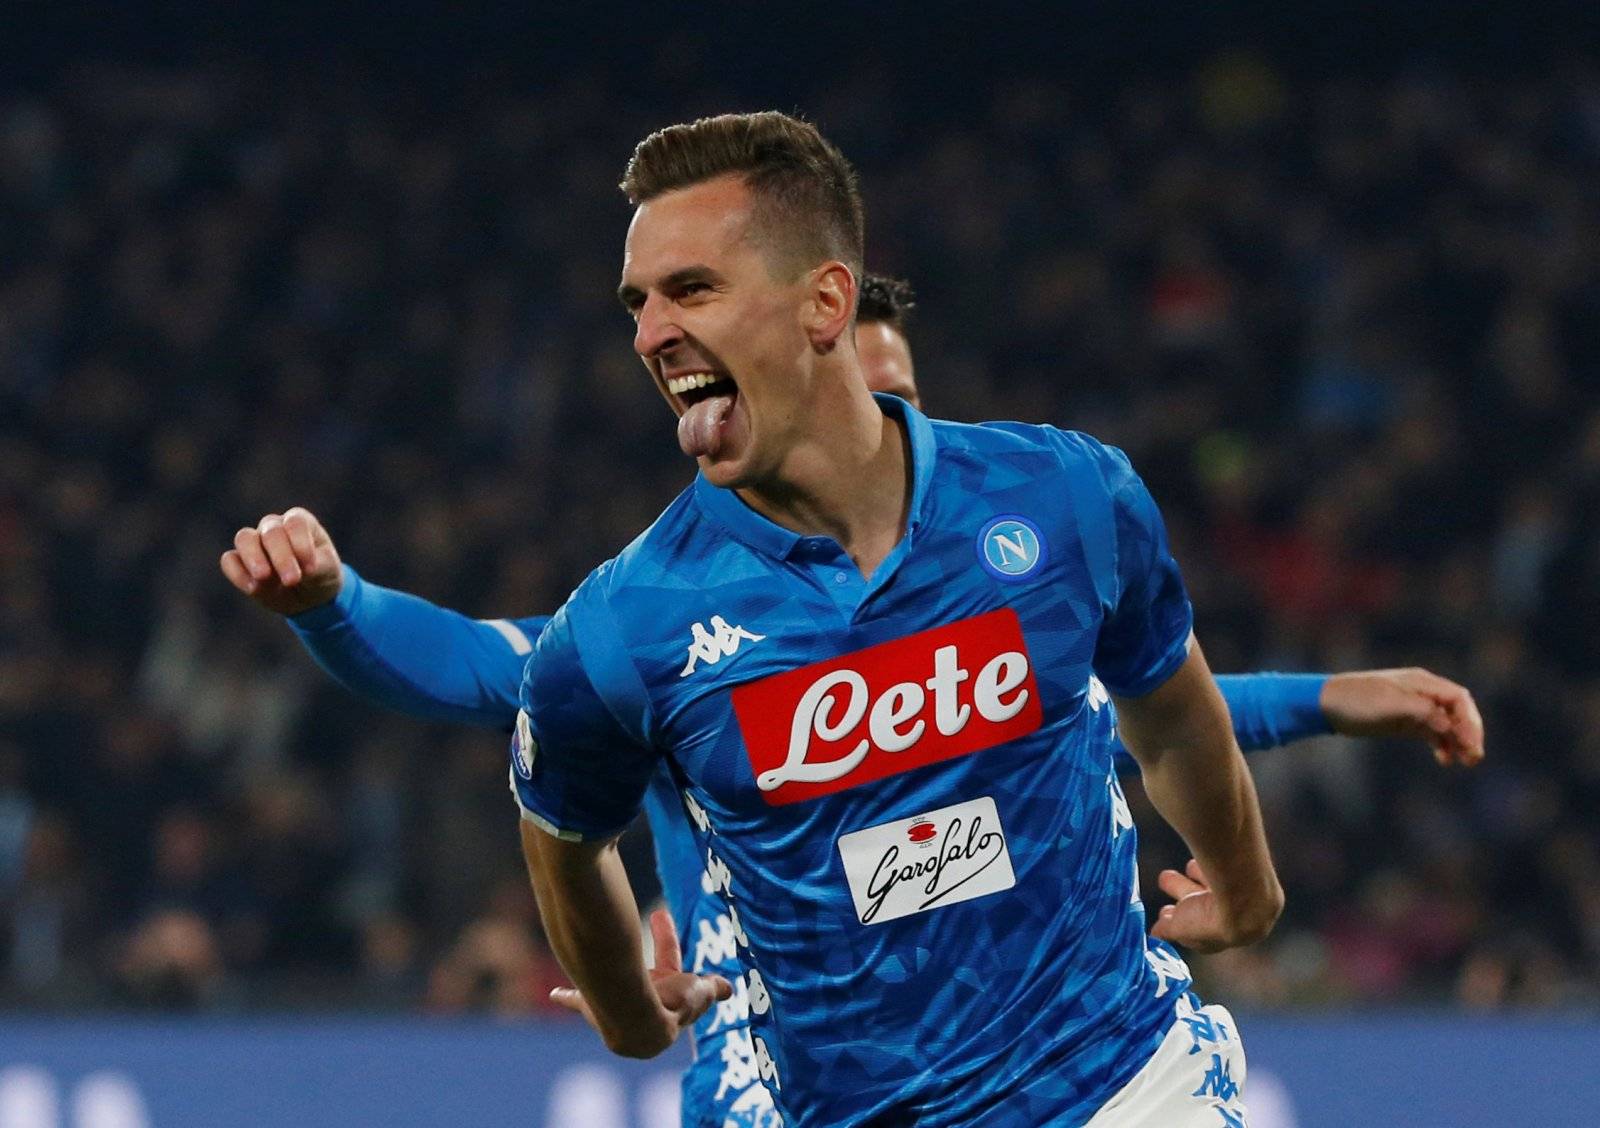 Tottenham Hotspur: Napoli striker Arkadiusz Milik could be available for cut-price deal - Opinion